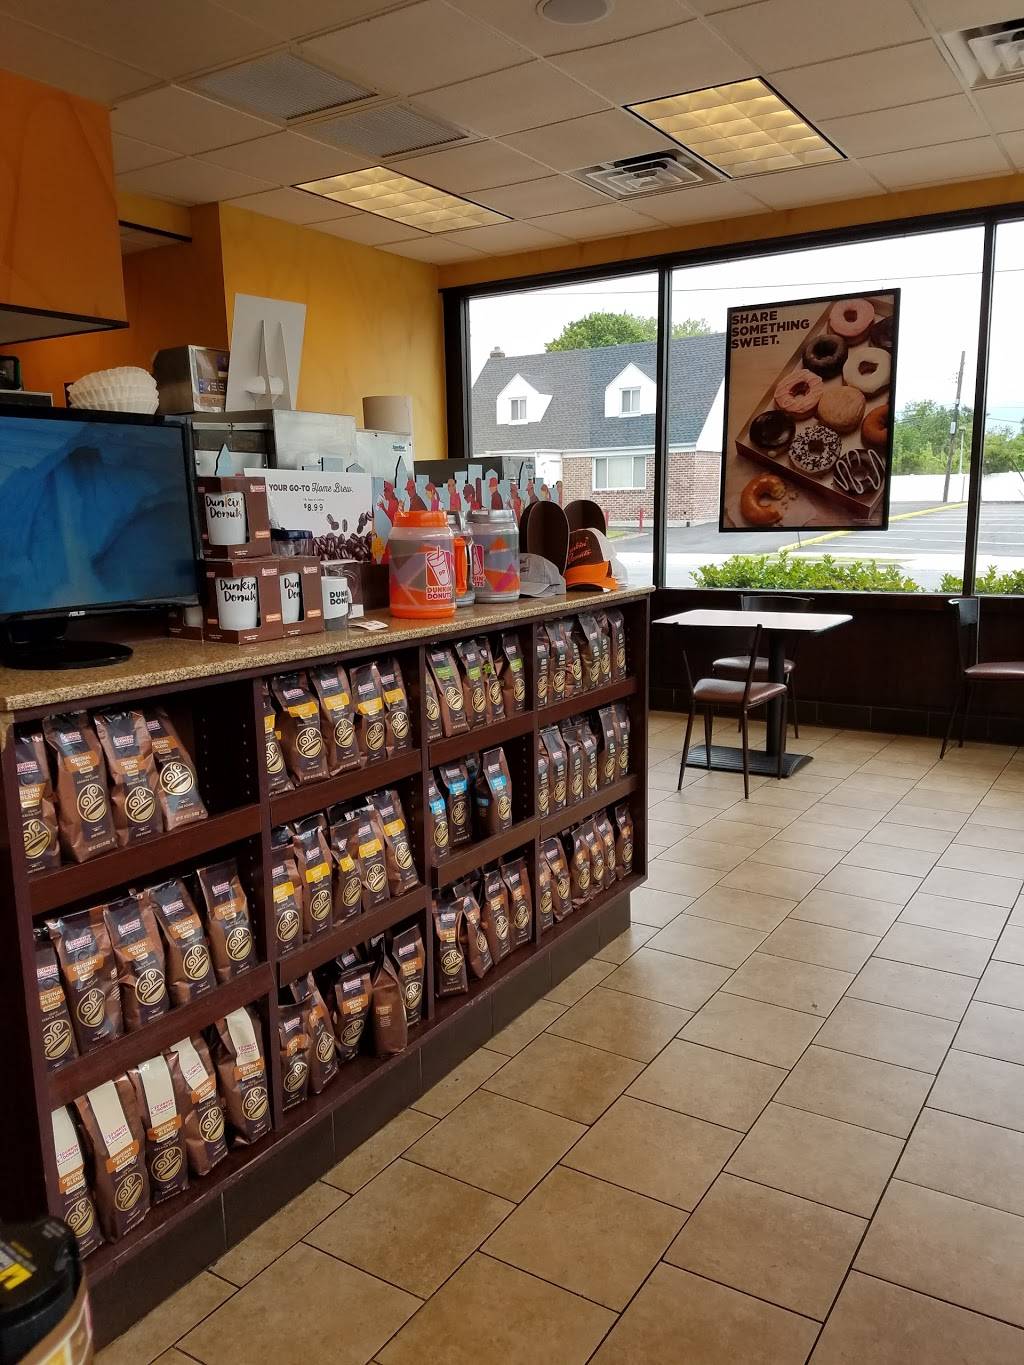 Dunkin Donuts | cafe | 1068 Old Country Rd, Plainview, NY 11803, USA | 5169350205 OR +1 516-935-0205